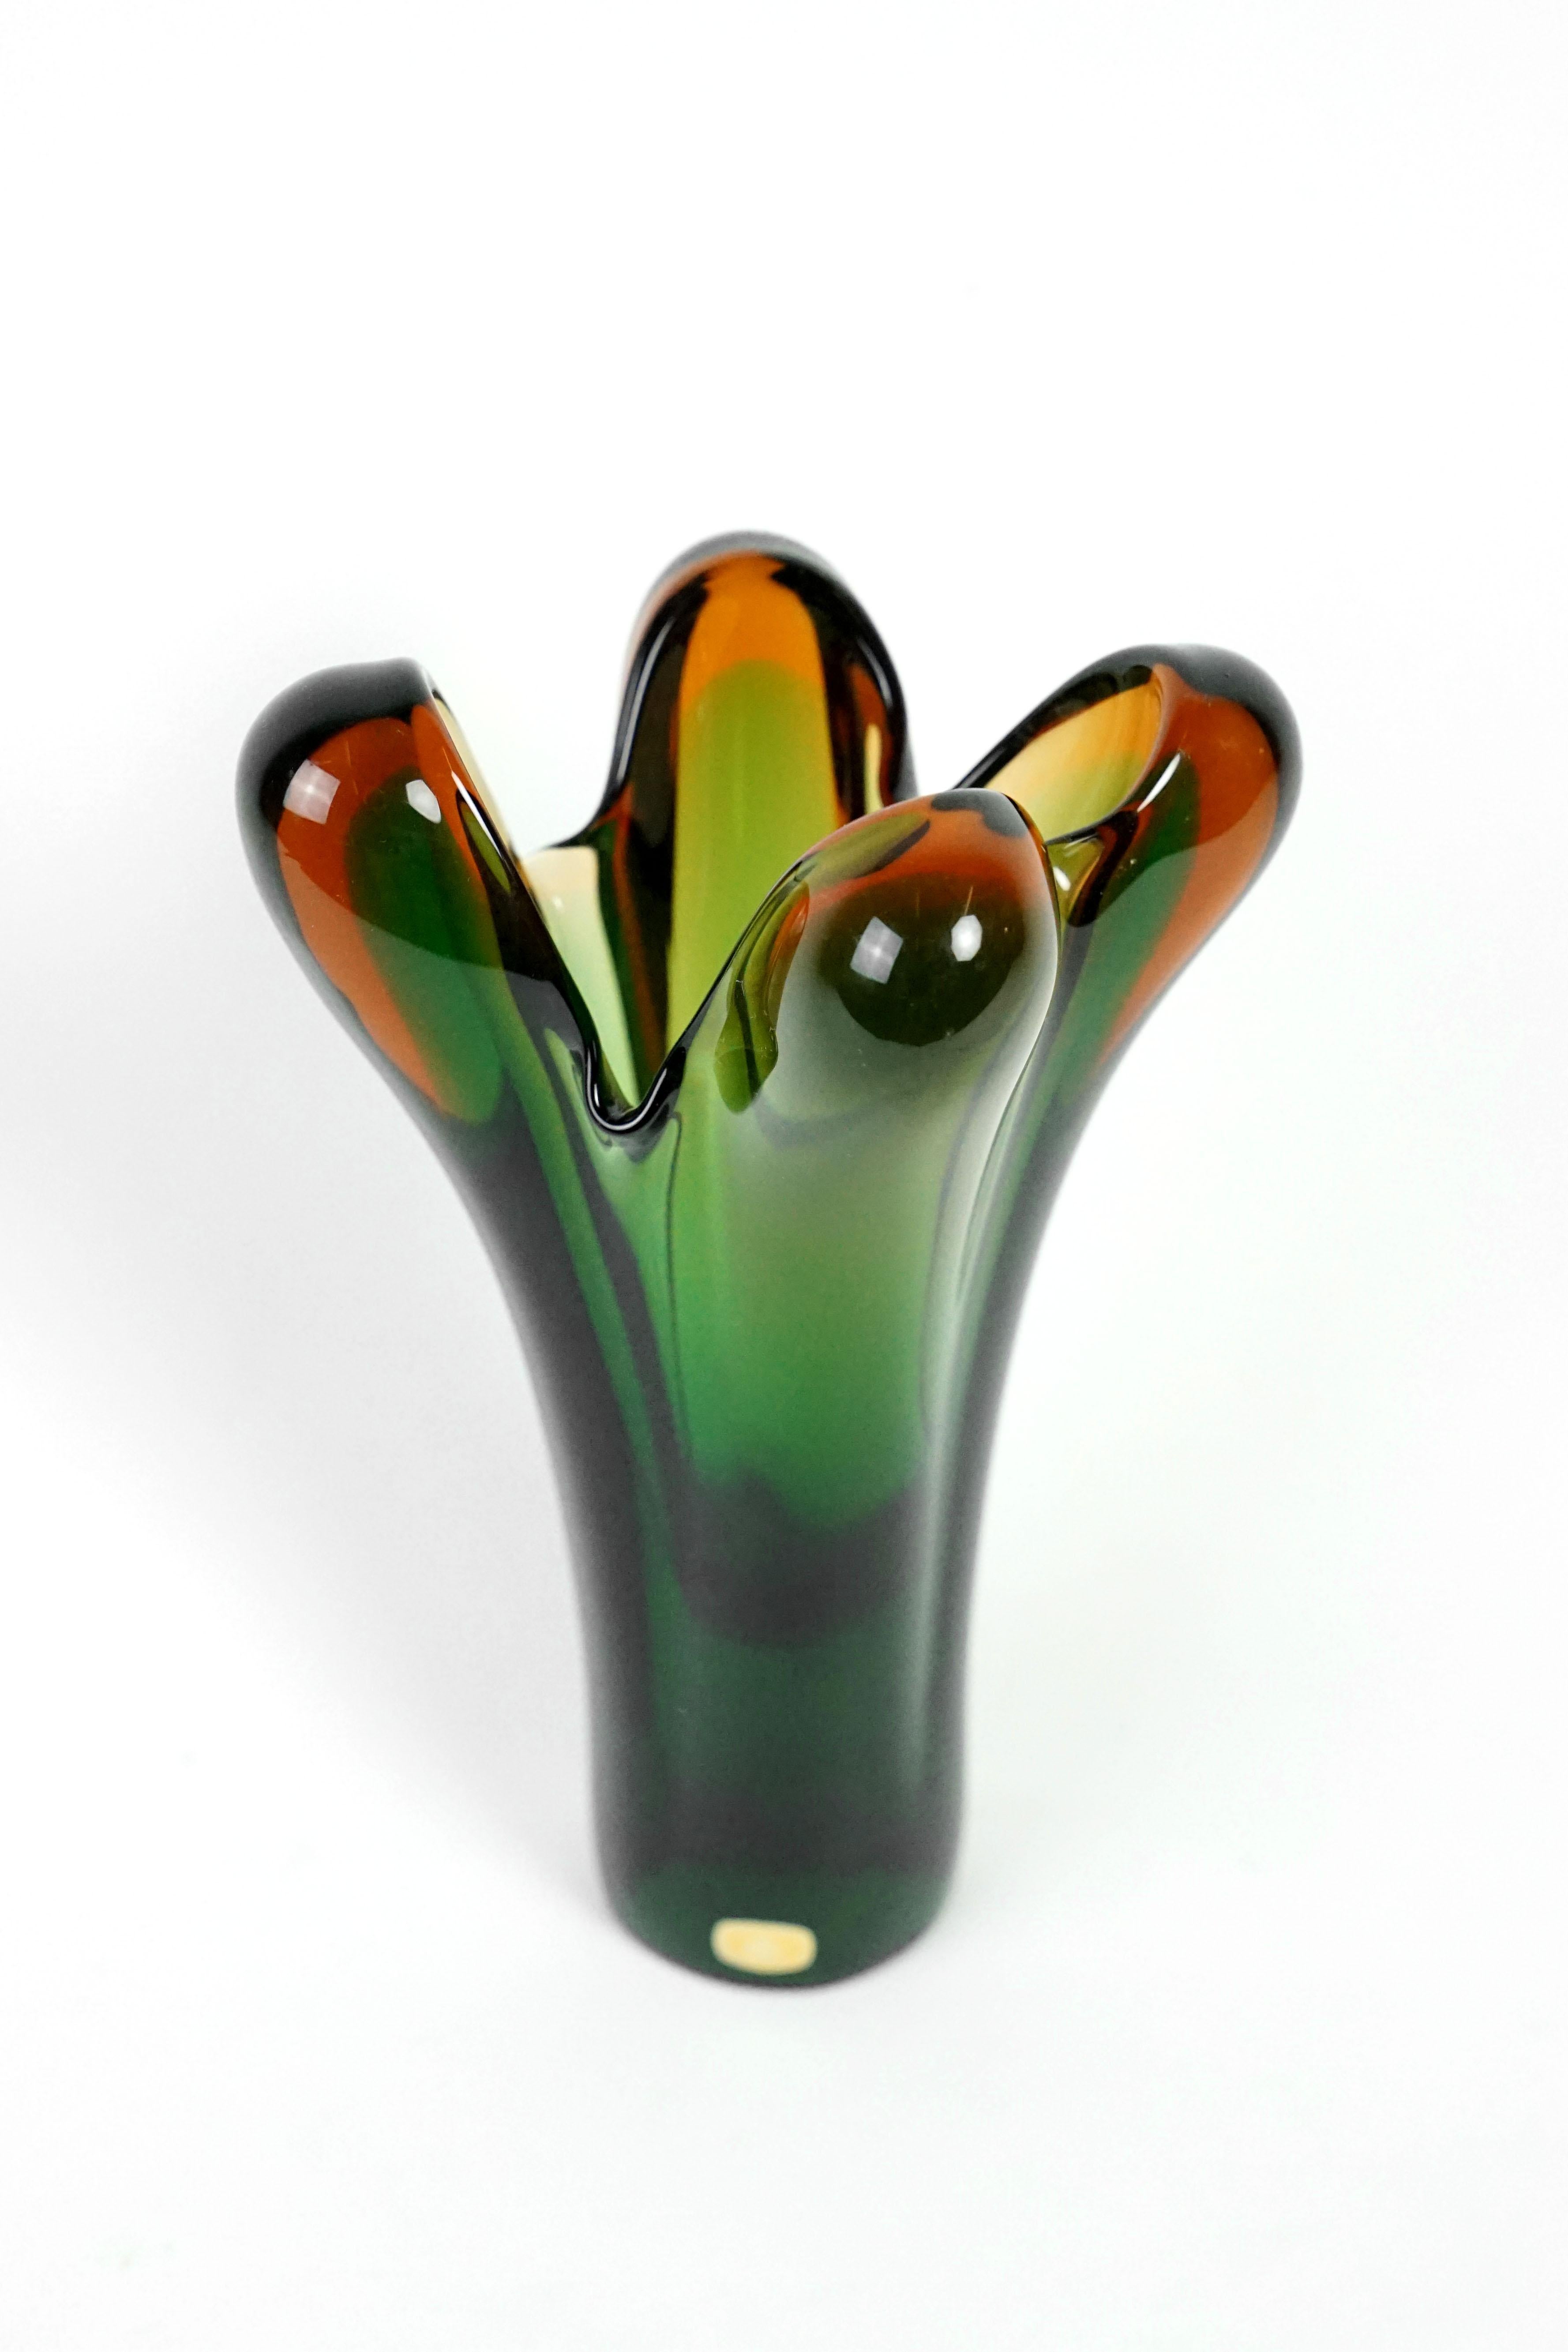 Rare and colorful art glass vase designed byJosef Hospodka for Chribska Glassmakers in former Czechoslovakia, 1960s. Flared lobed form in green and red.

Very good vintage condition.